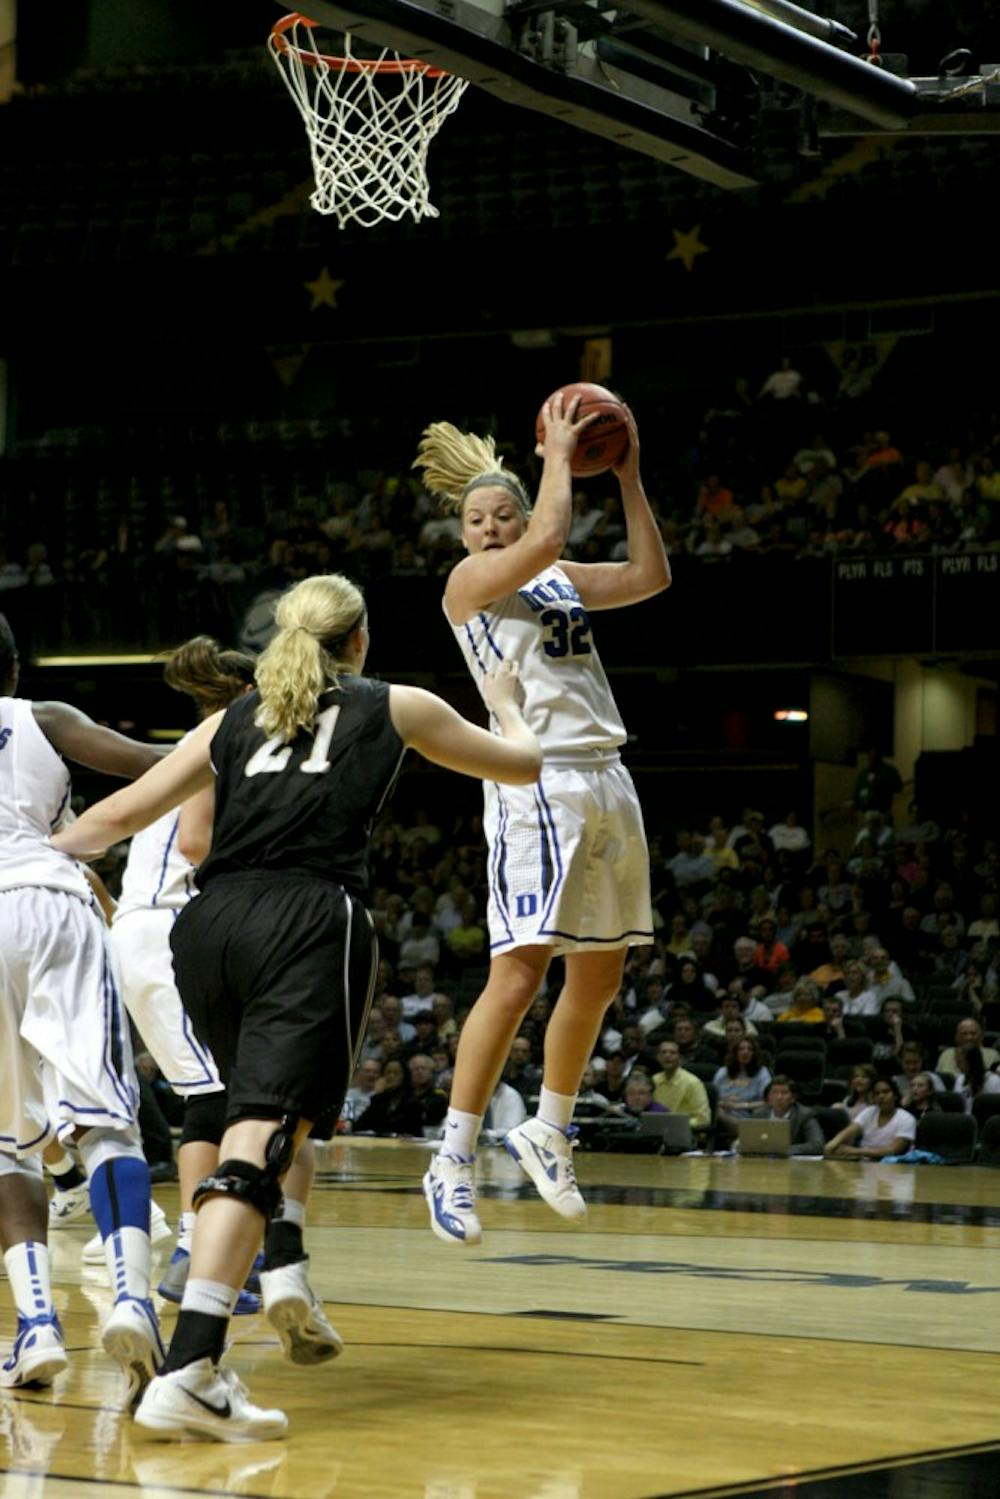 Tricia Liston scored 23 points on a 10-for-15 performance from the floor as the Blue Devils defeated Vanderbilt on its home floor.